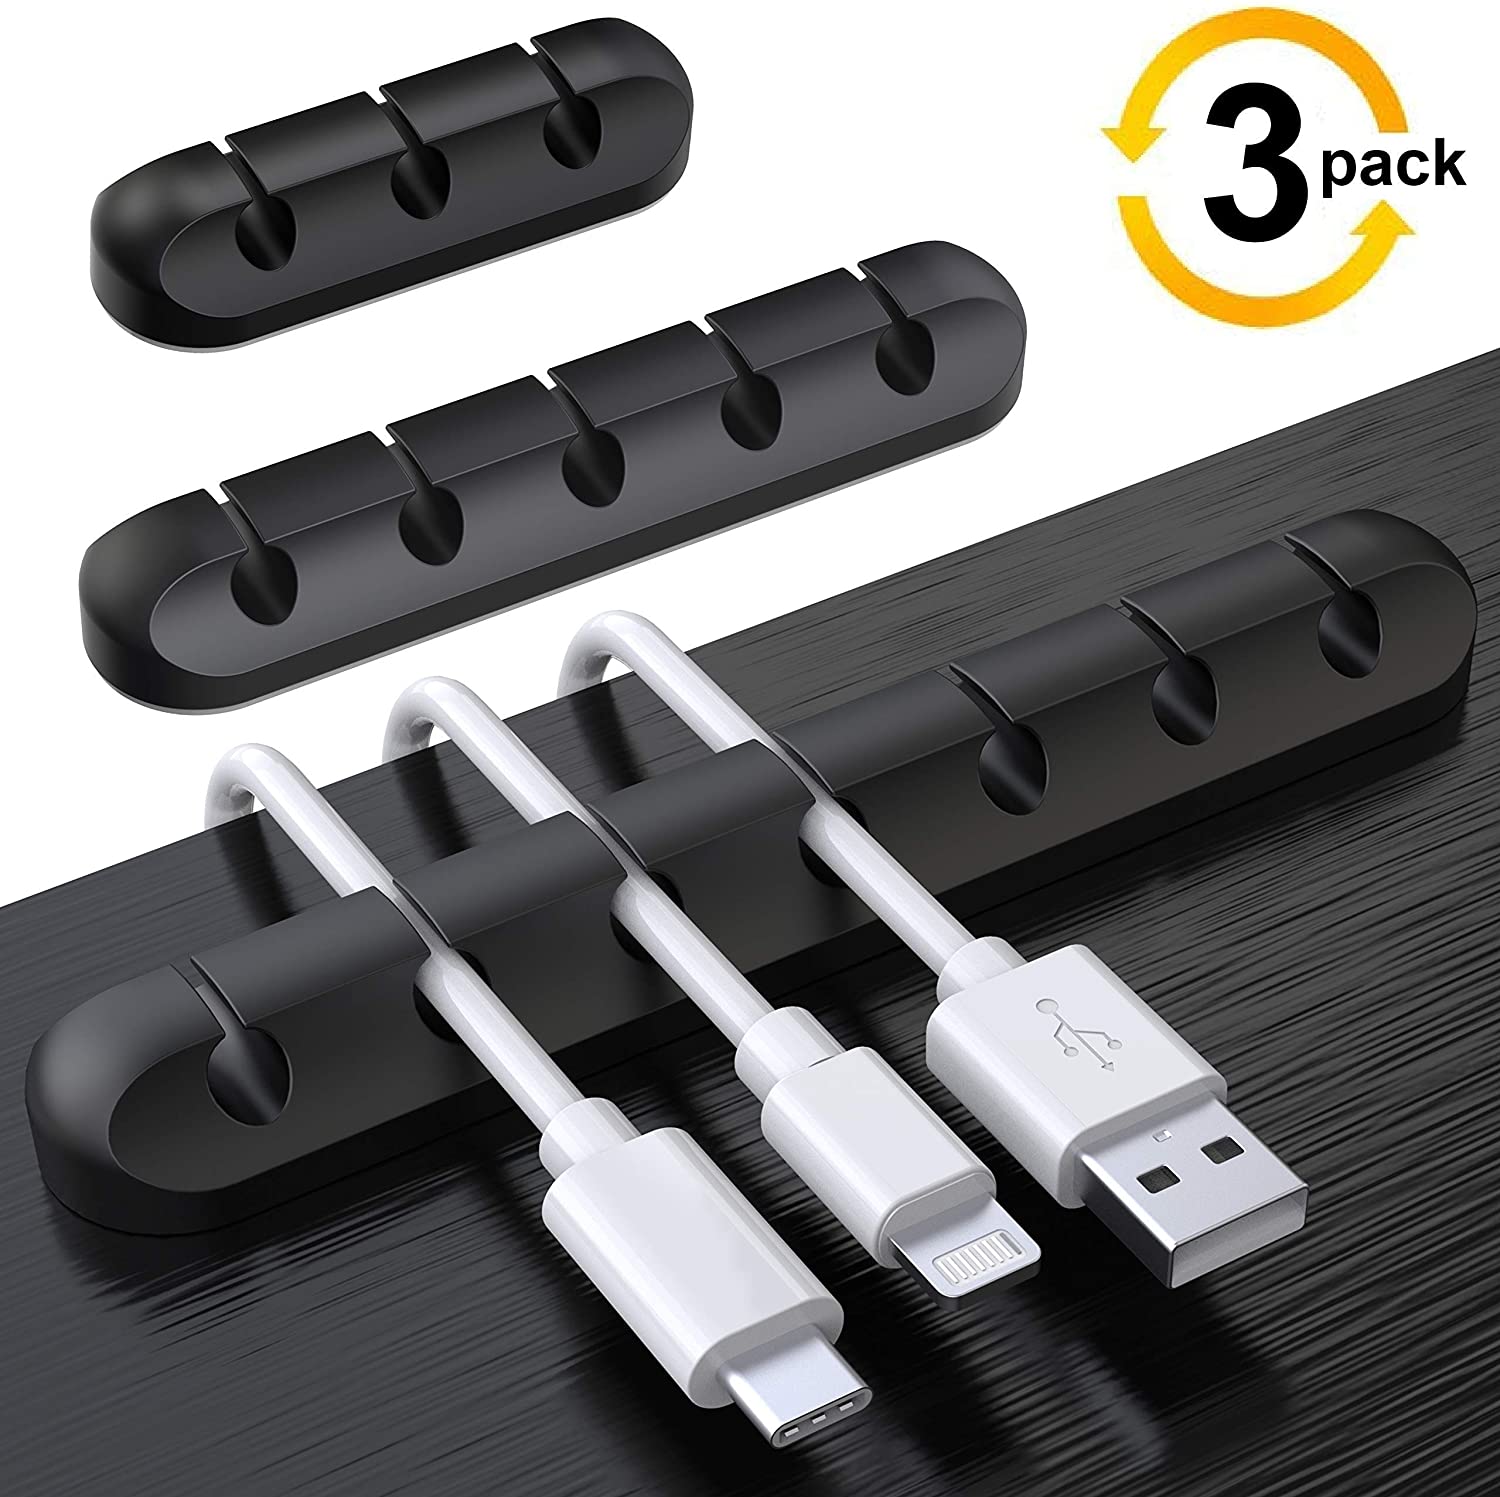 SOULWIT Self-Adhesive Cable Cord Organizer Clips, 3-Pack